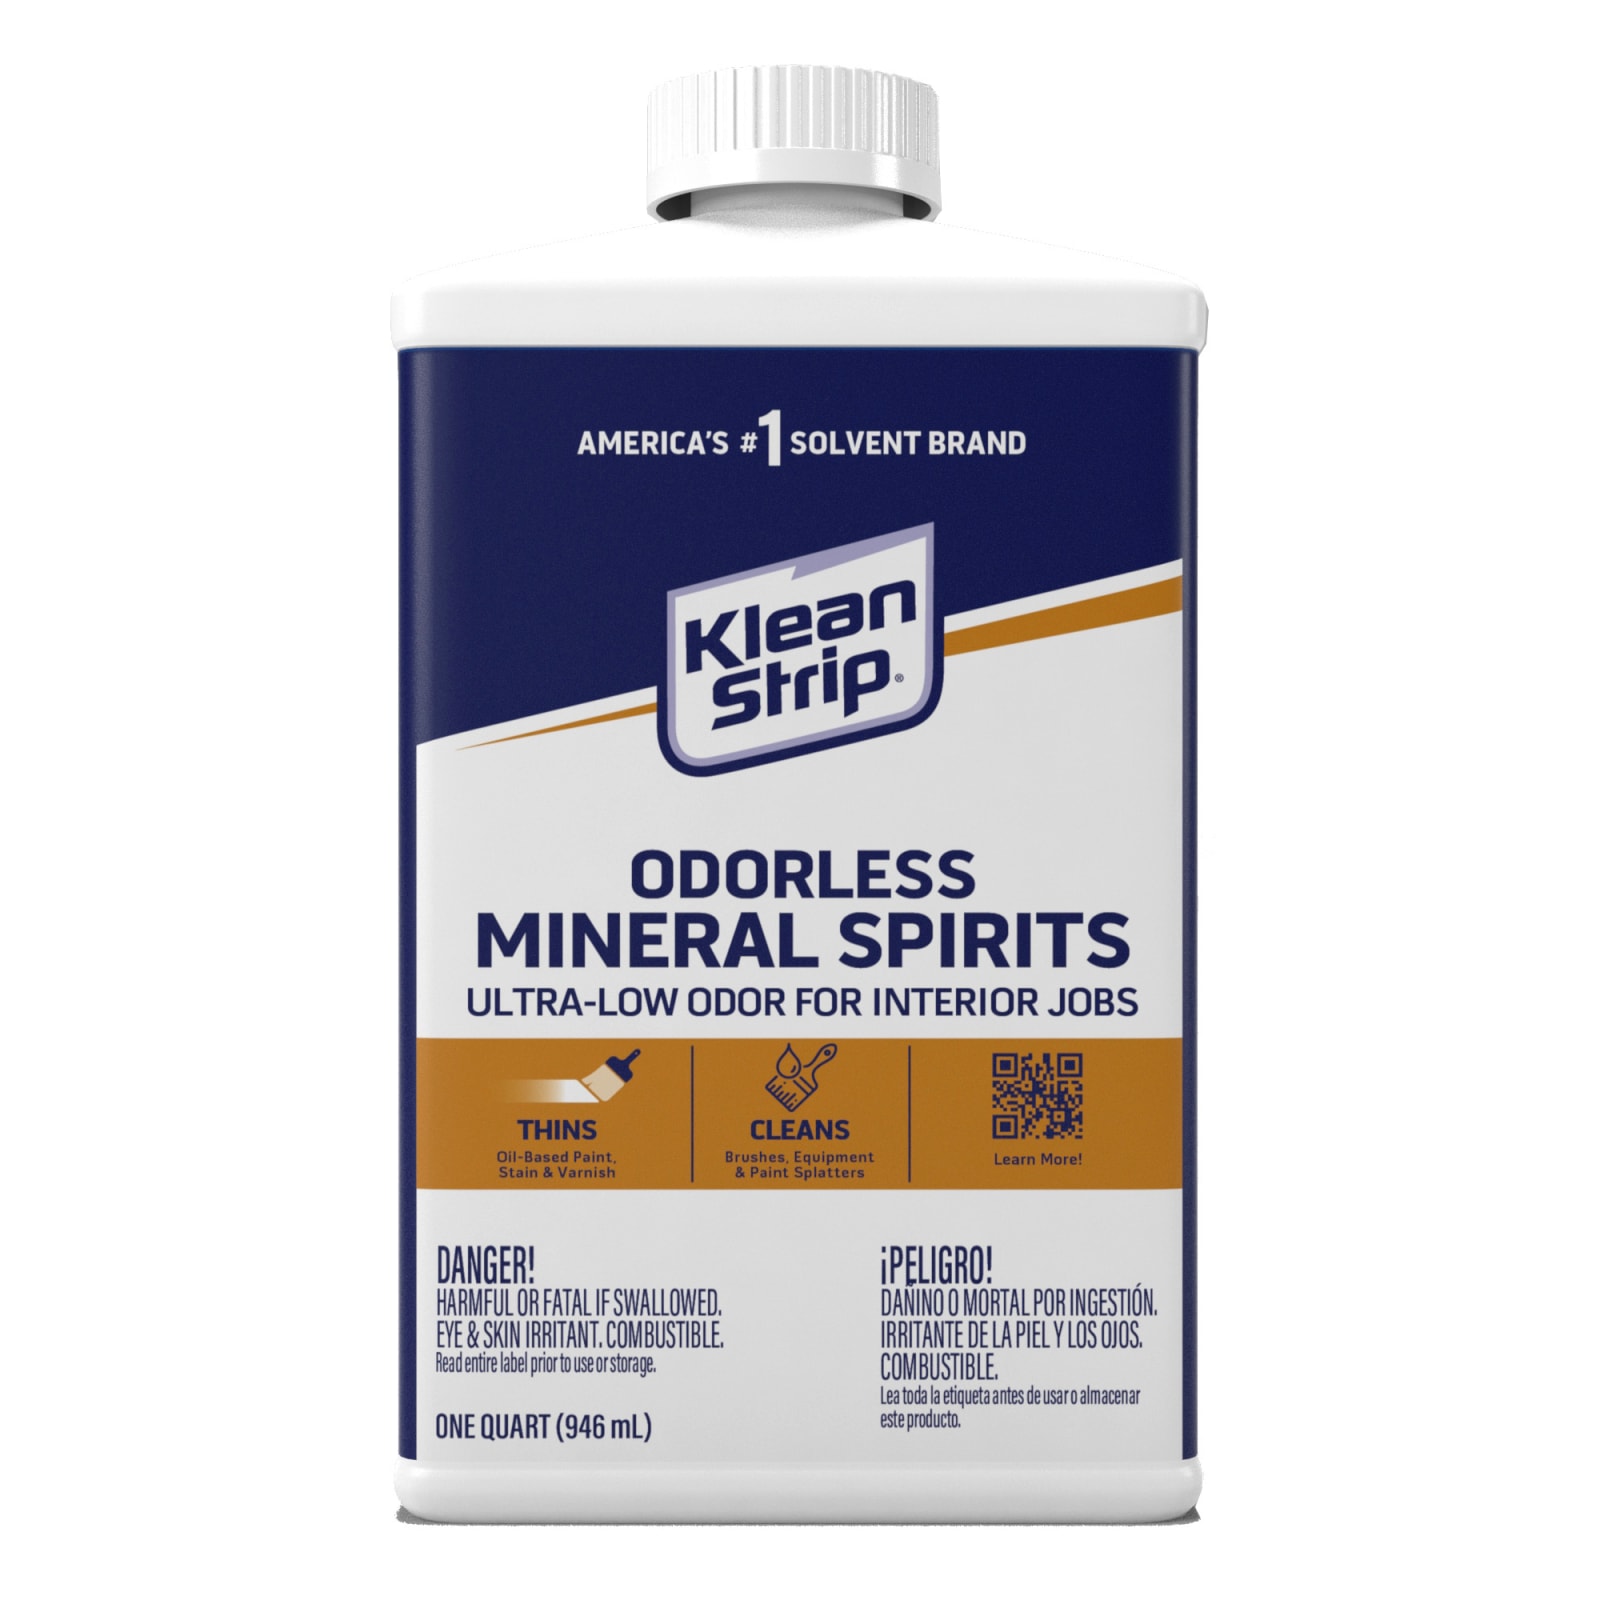 What Are Mineral Spirits Used For? - Mineral Spirits